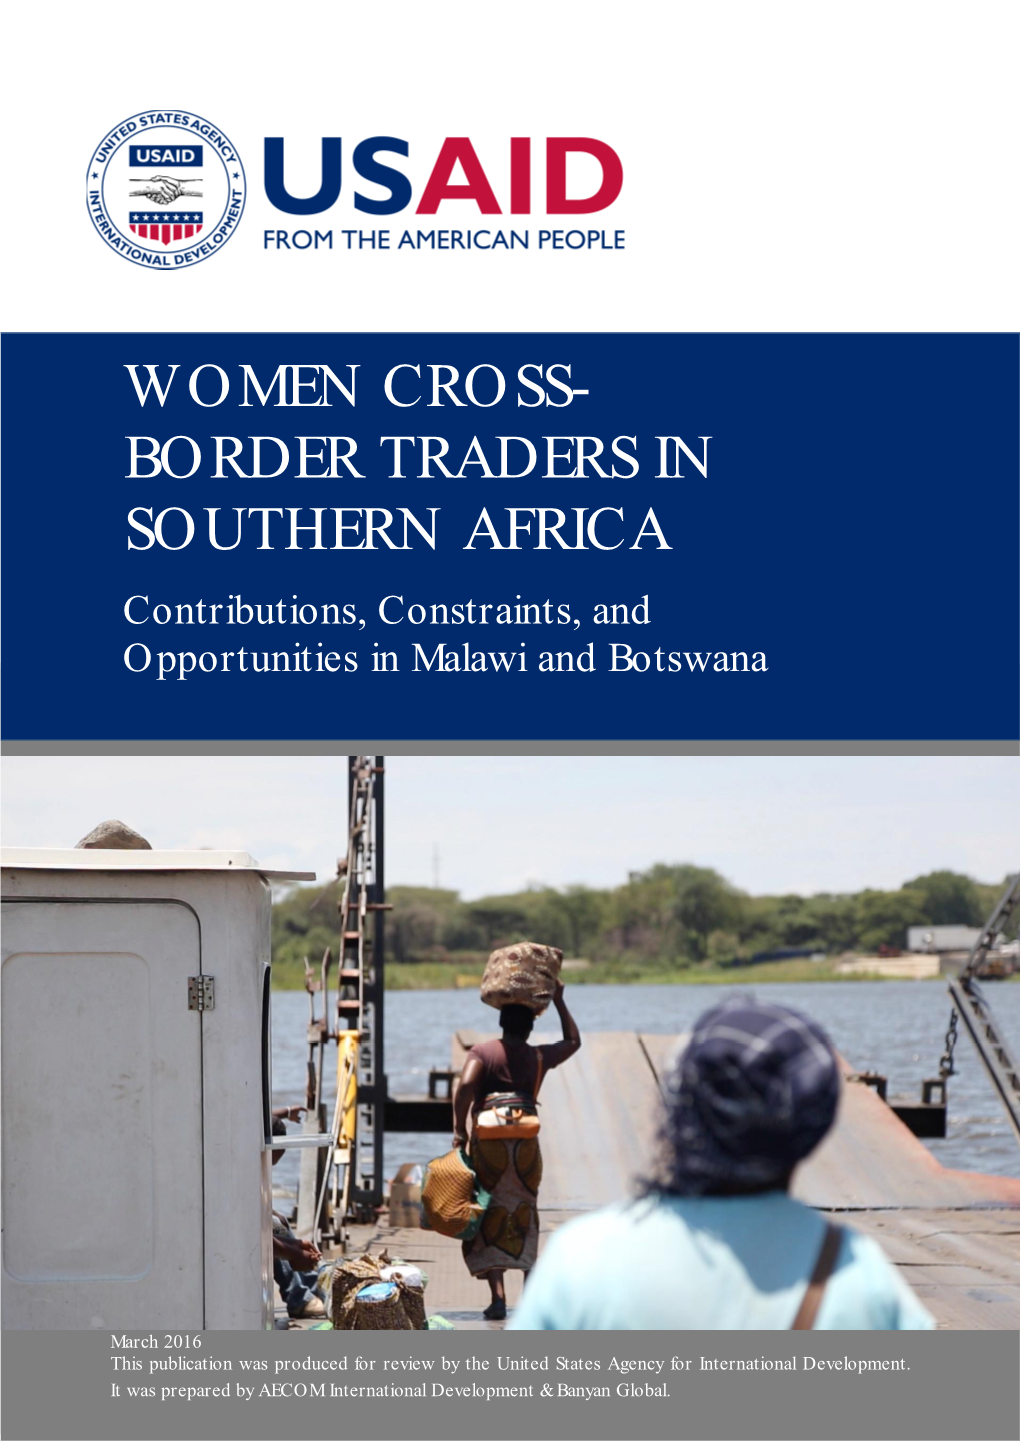 WOMEN CROSS-BORDER TRADERS in SOUTHERN AFRICA Contributions, Constraints, and Opportunities in Malawi and Botswana